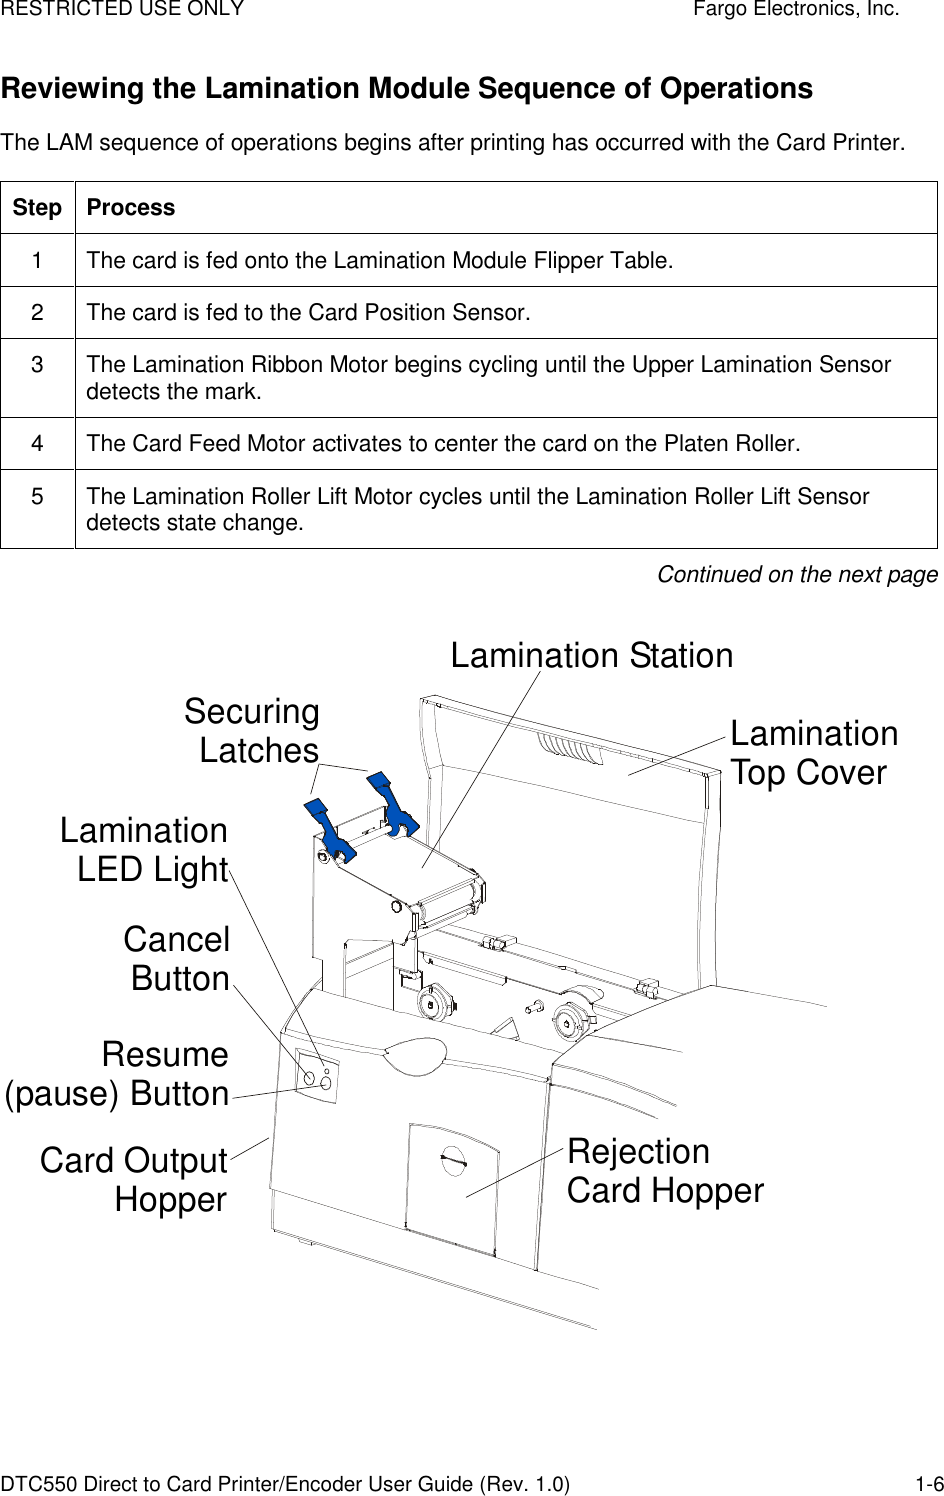 RESTRICTED USE ONLY    Fargo Electronics, Inc. DTC550 Direct to Card Printer/Encoder User Guide (Rev. 1.0)  1-6 Reviewing the Lamination Module Sequence of Operations The LAM sequence of operations begins after printing has occurred with the Card Printer. Step Process 1  The card is fed onto the Lamination Module Flipper Table.   2  The card is fed to the Card Position Sensor.   3  The Lamination Ribbon Motor begins cycling until the Upper Lamination Sensor detects the mark. 4  The Card Feed Motor activates to center the card on the Platen Roller. 5  The Lamination Roller Lift Motor cycles until the Lamination Roller Lift Sensor detects state change. Continued on the next page  LaminationTop CoverSecuringLatchesLamination StationLaminationLED LightCancelButtonResume(pause) ButtonRejectionCard HopperCard OutputHopper  